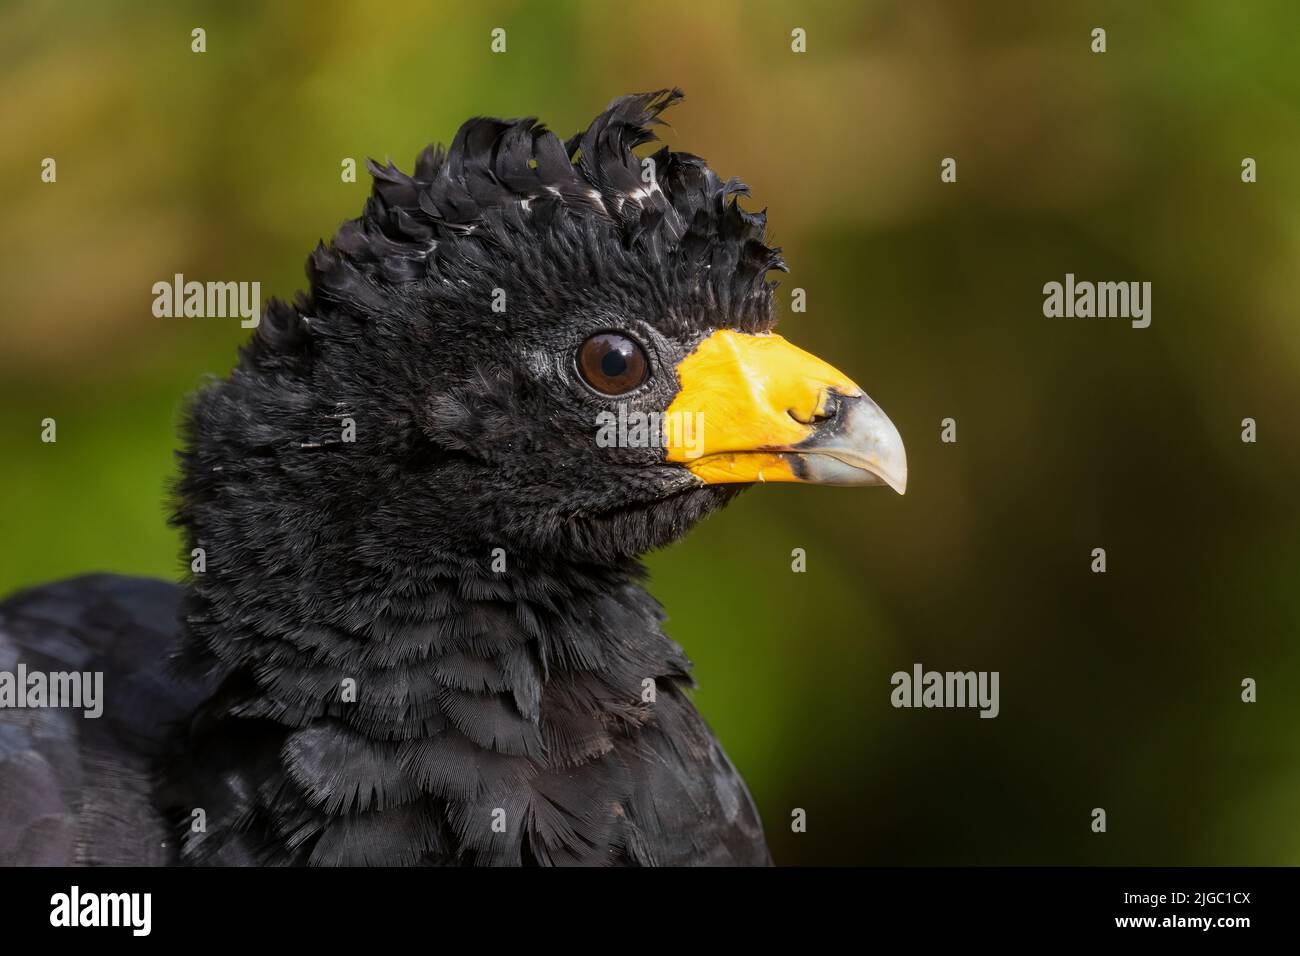 Black Curassow - Crax alector, black beautiful ground bird from South American forests and woodlands, Amazonia, Brazil. Stock Photo